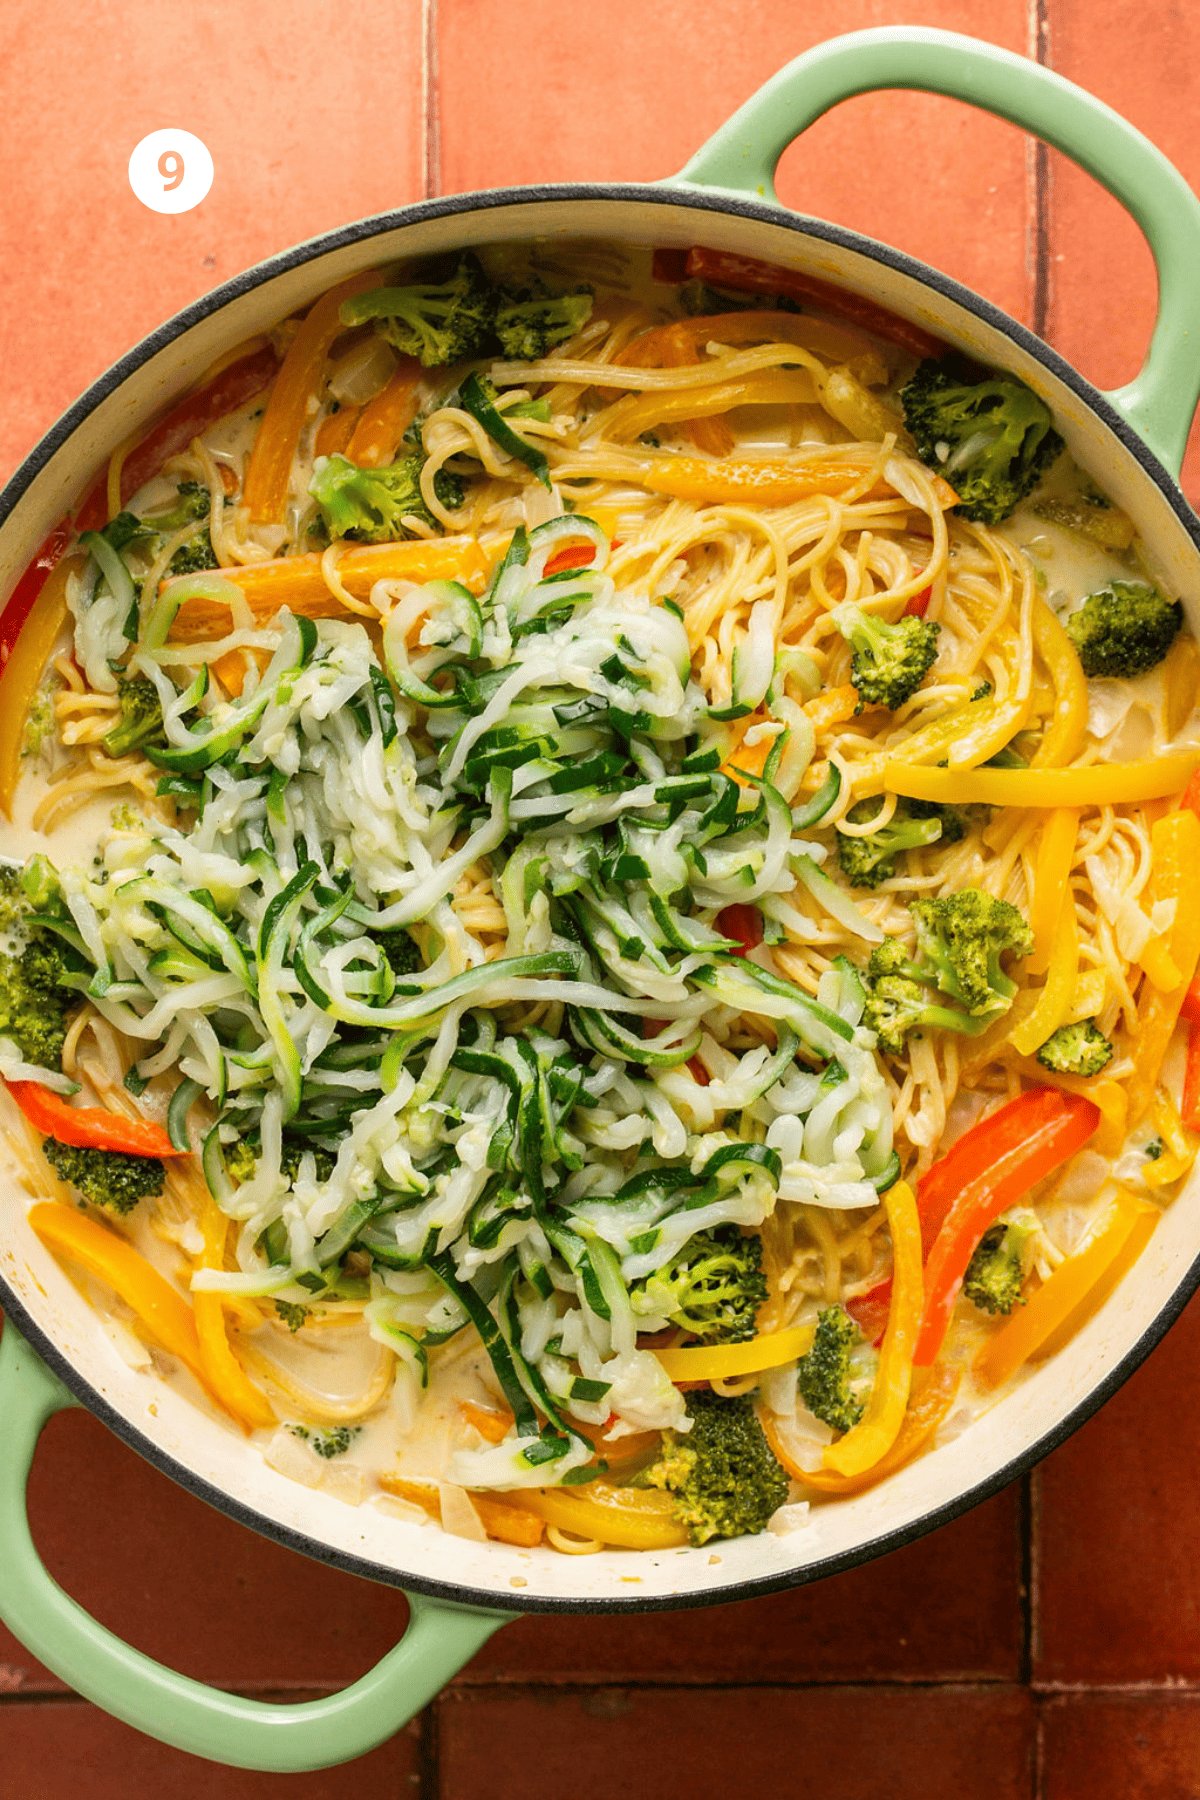 Spiralized zucchini added to the pot.